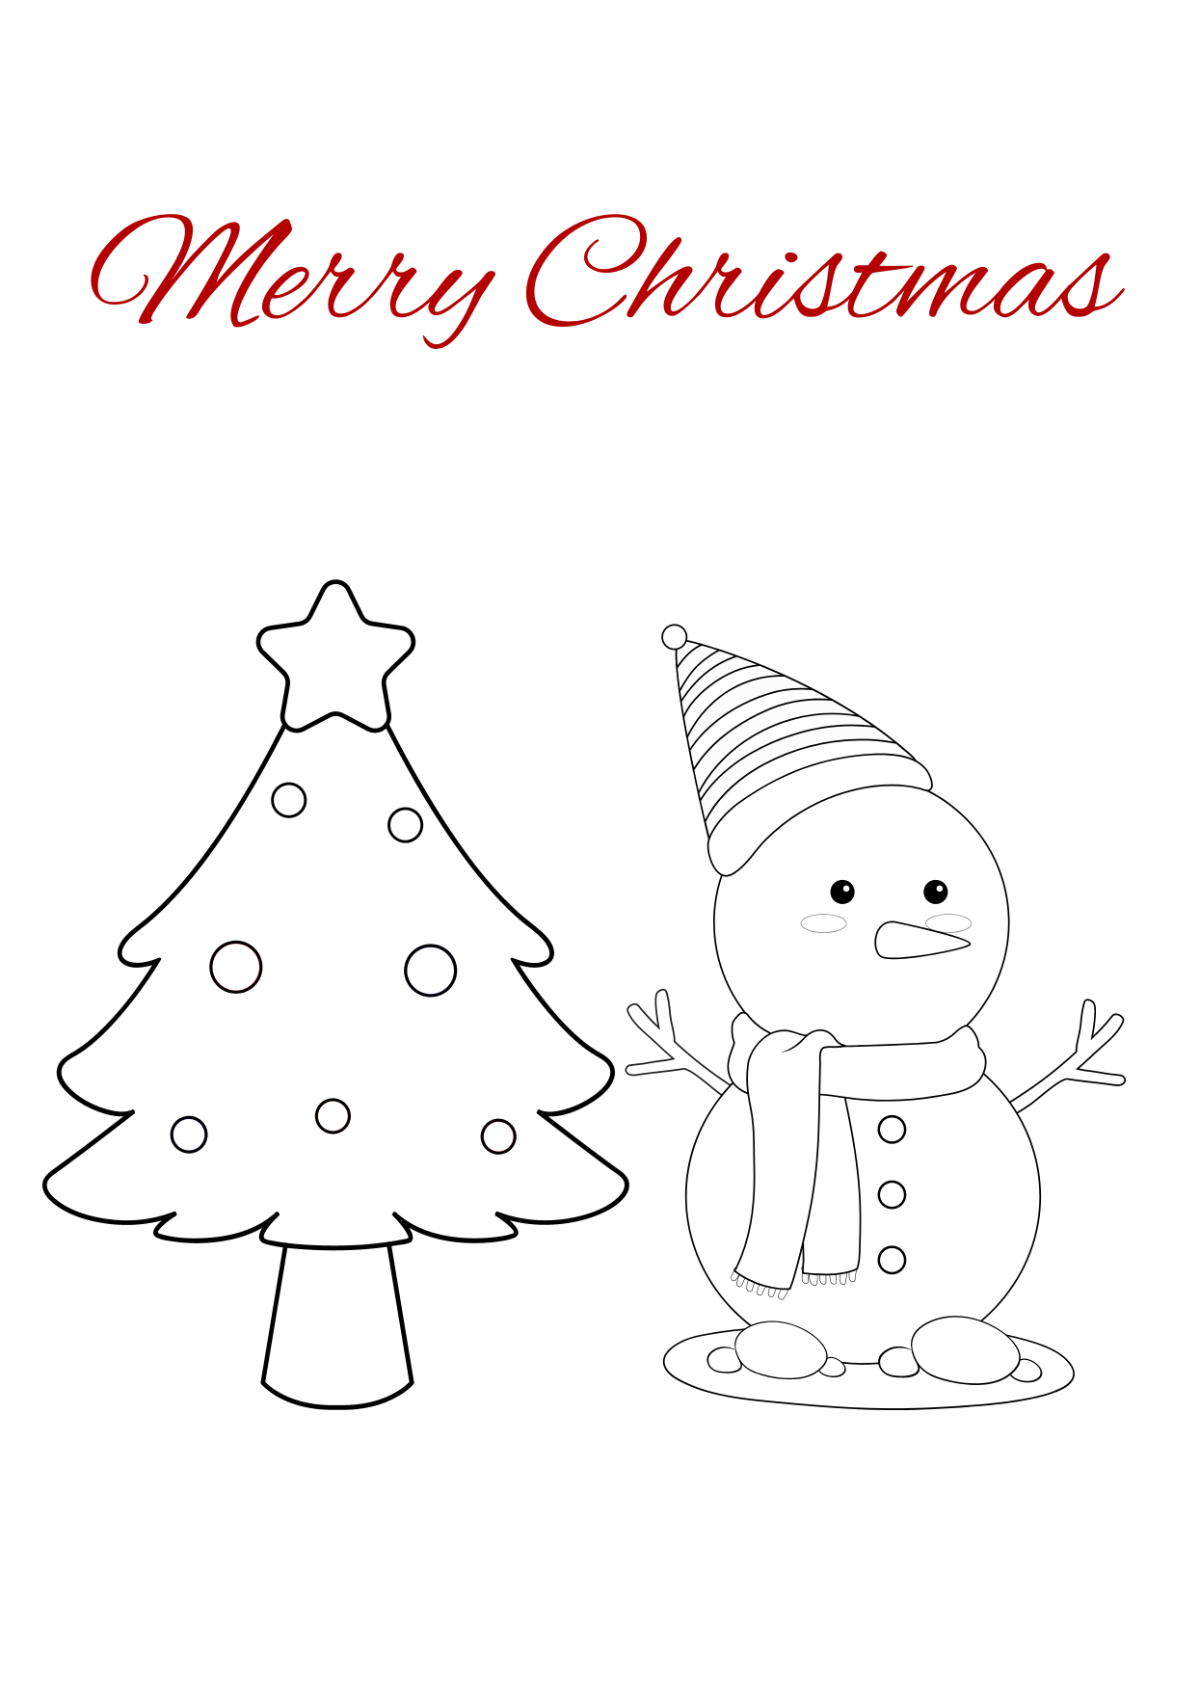 Merry Christmas Drawing Template